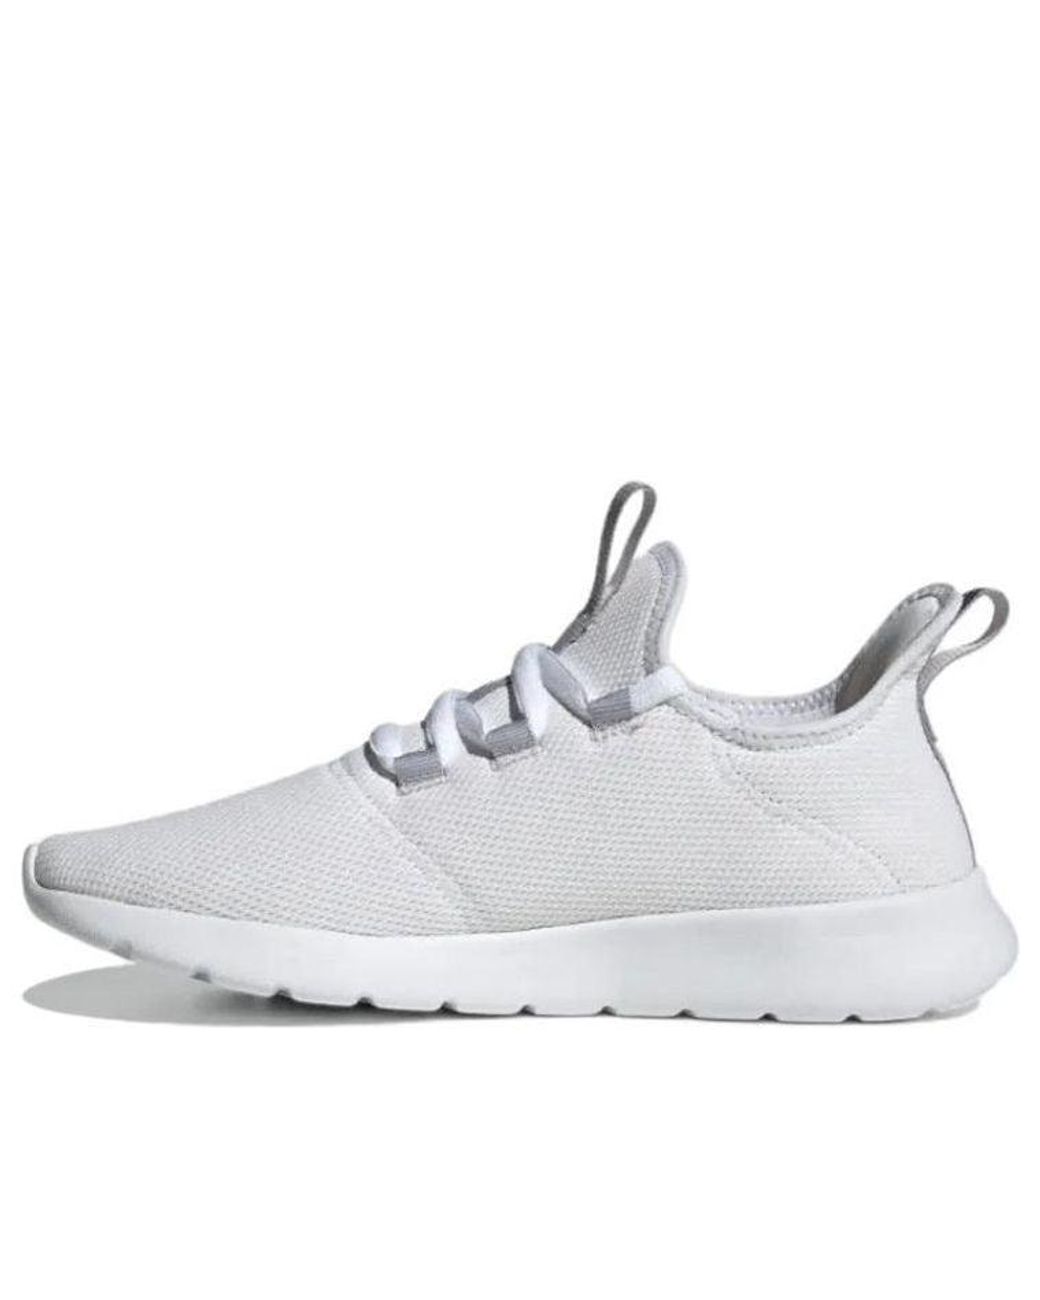 adidas Cloudfoam Pure 2.0 Shoes in White | Lyst